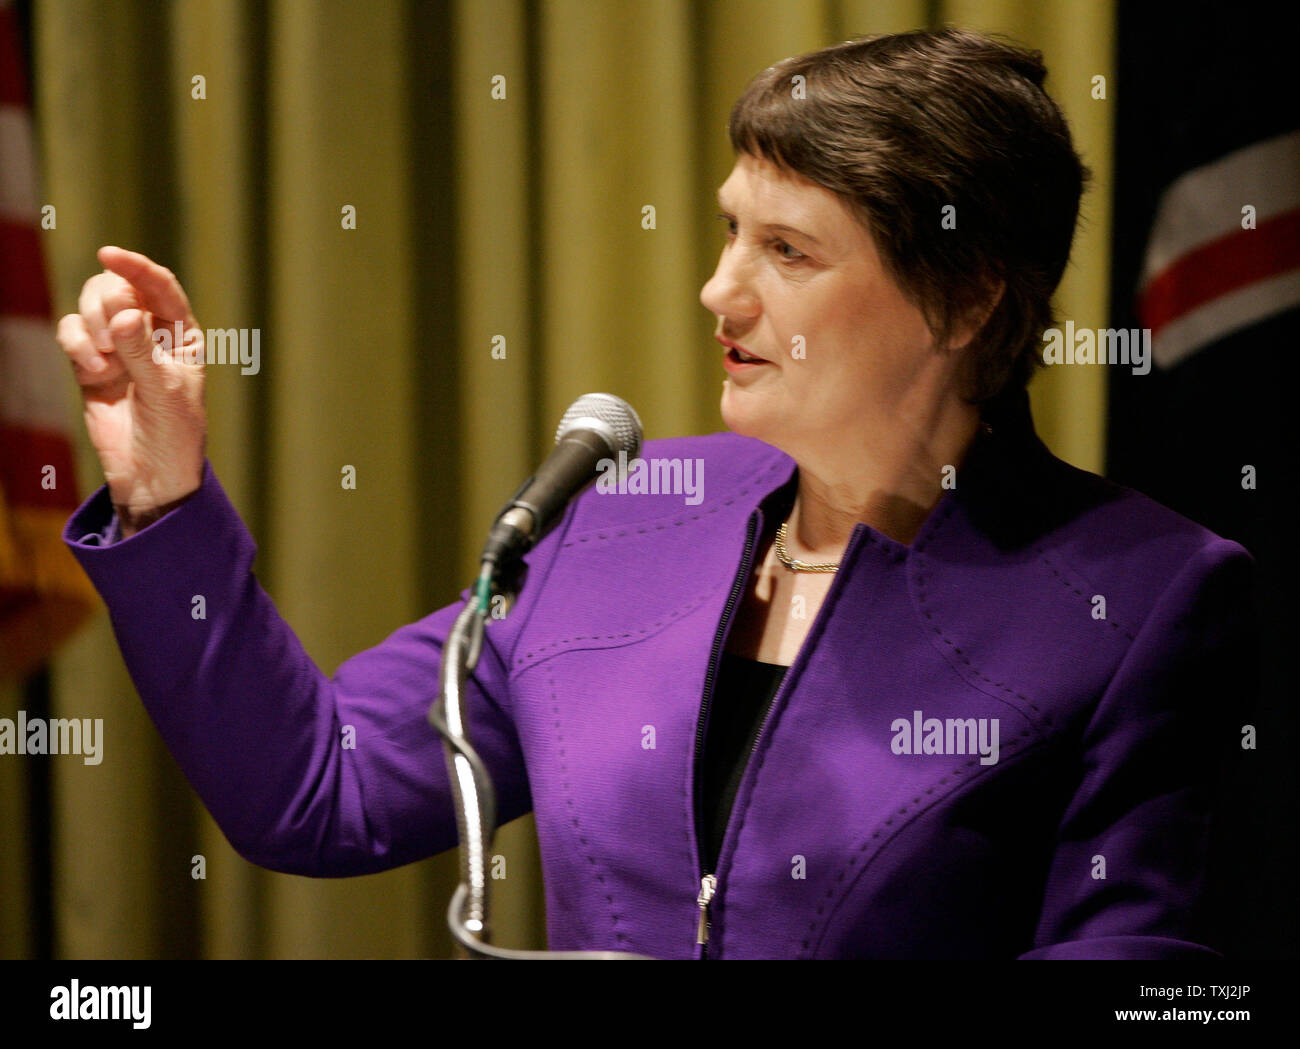 Helen Clark, prime minister of New Zealand, delivers an address to the Chicago Council on Global Affairs on March 22, 2007 in Chicago. Clark discussed trade and the challenge of globalization in her address. (UPI Photo/Brian Kersey) Stock Photo